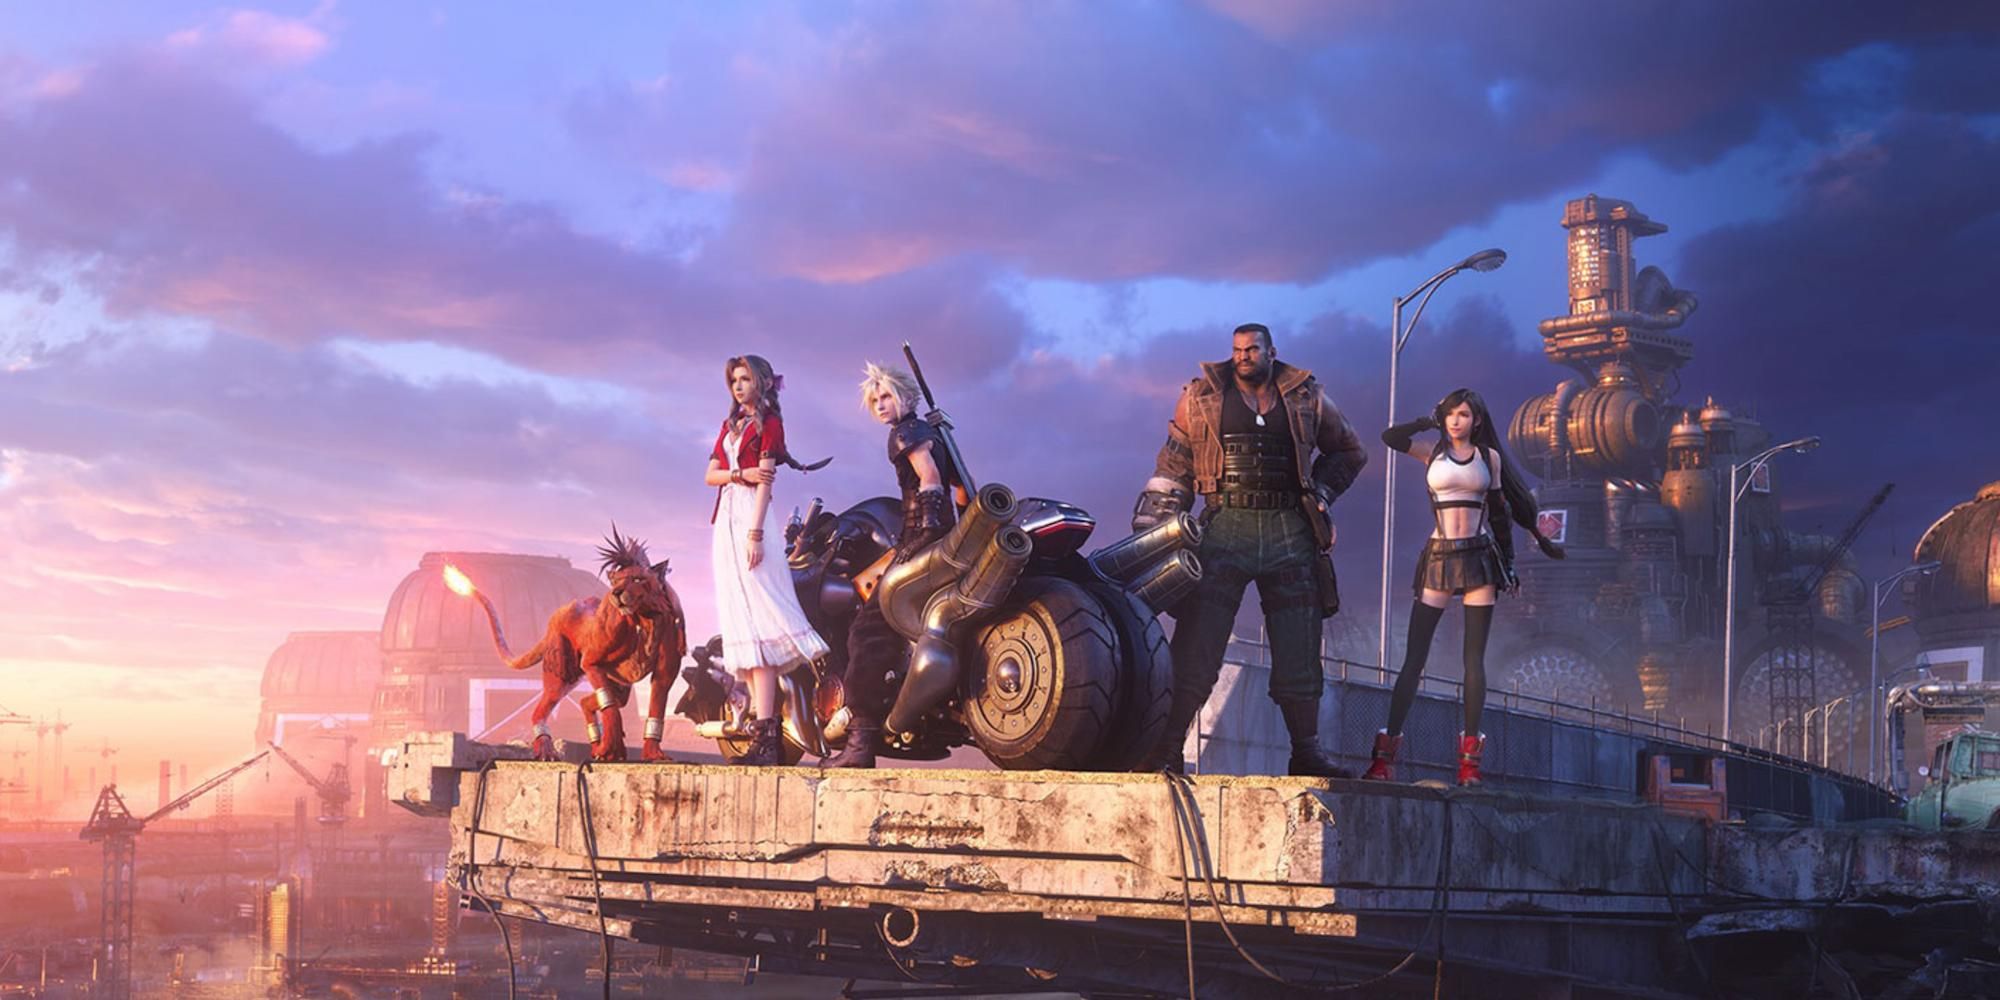 Promo shot from Final Fantasy 7 Remake featuring Cloud, Tifa, Barrett, Red 13, and Aerith